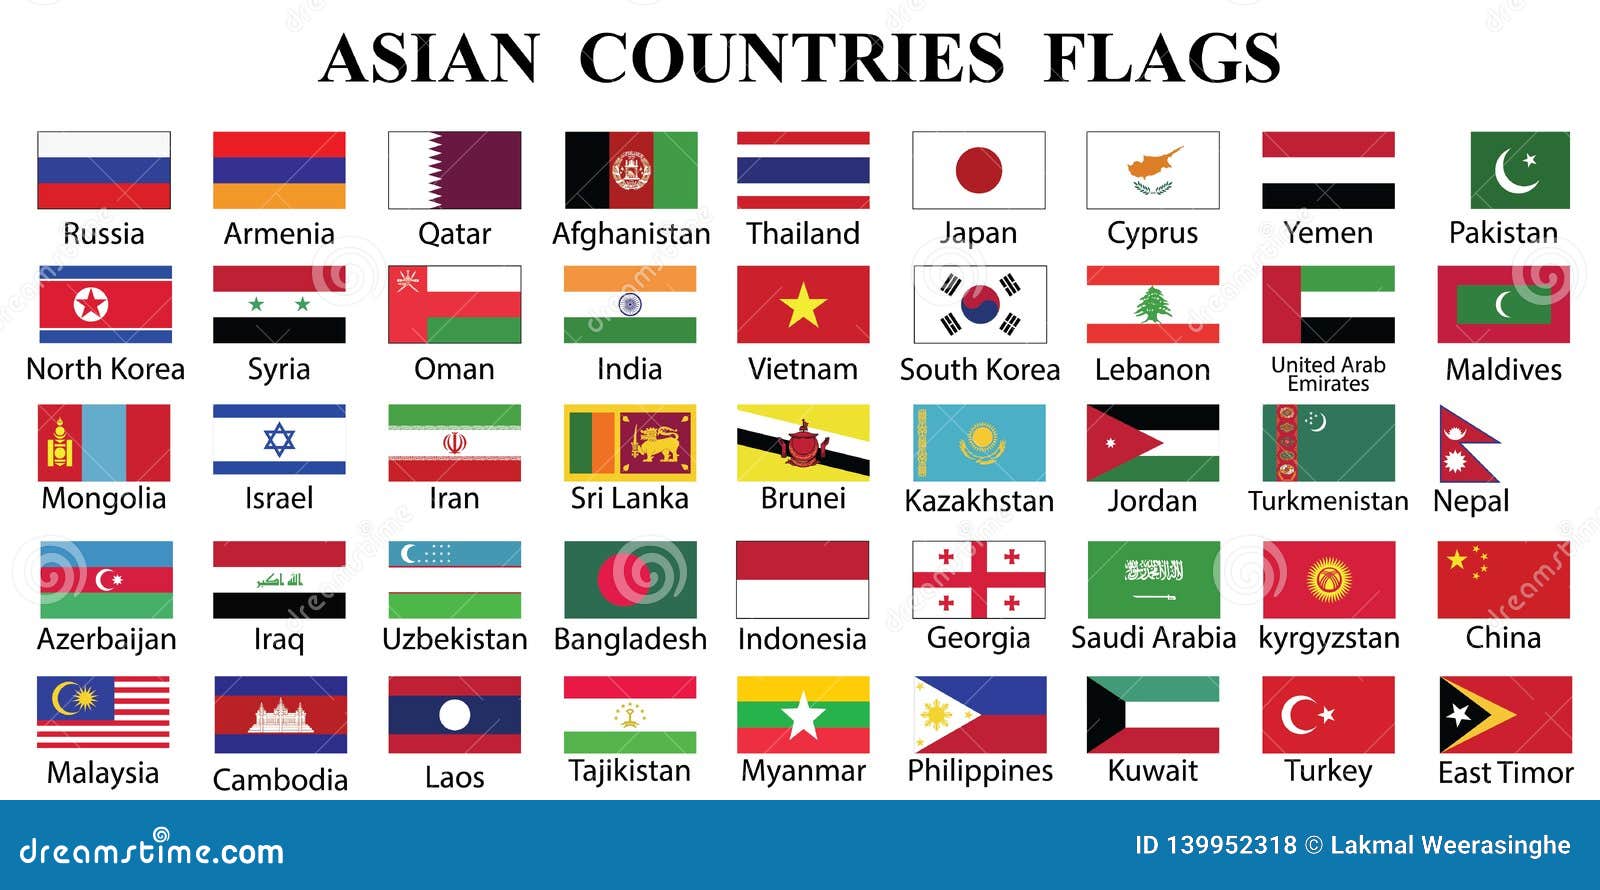 Flags of asian countries